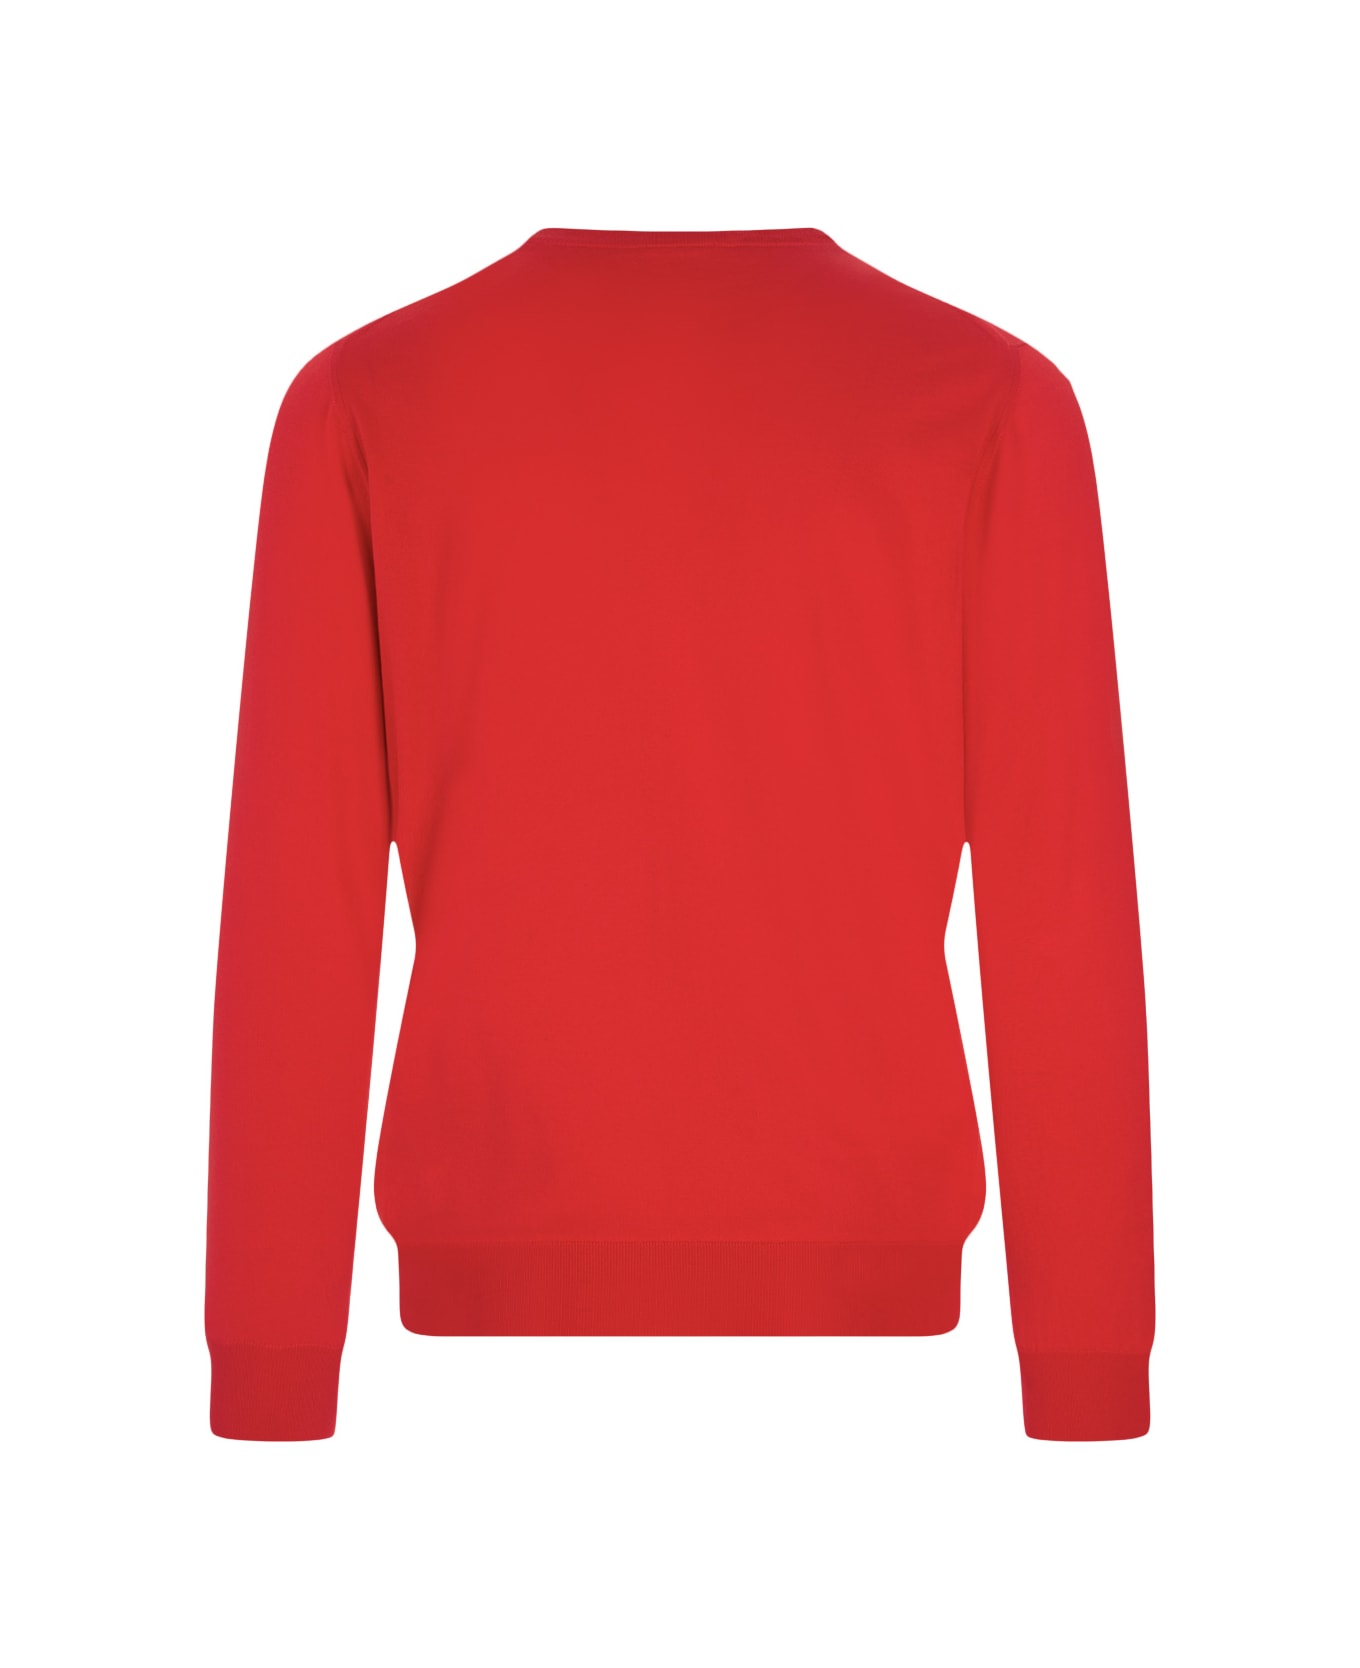 Kiton Red Wool Crew Neck Sweater - Rosso